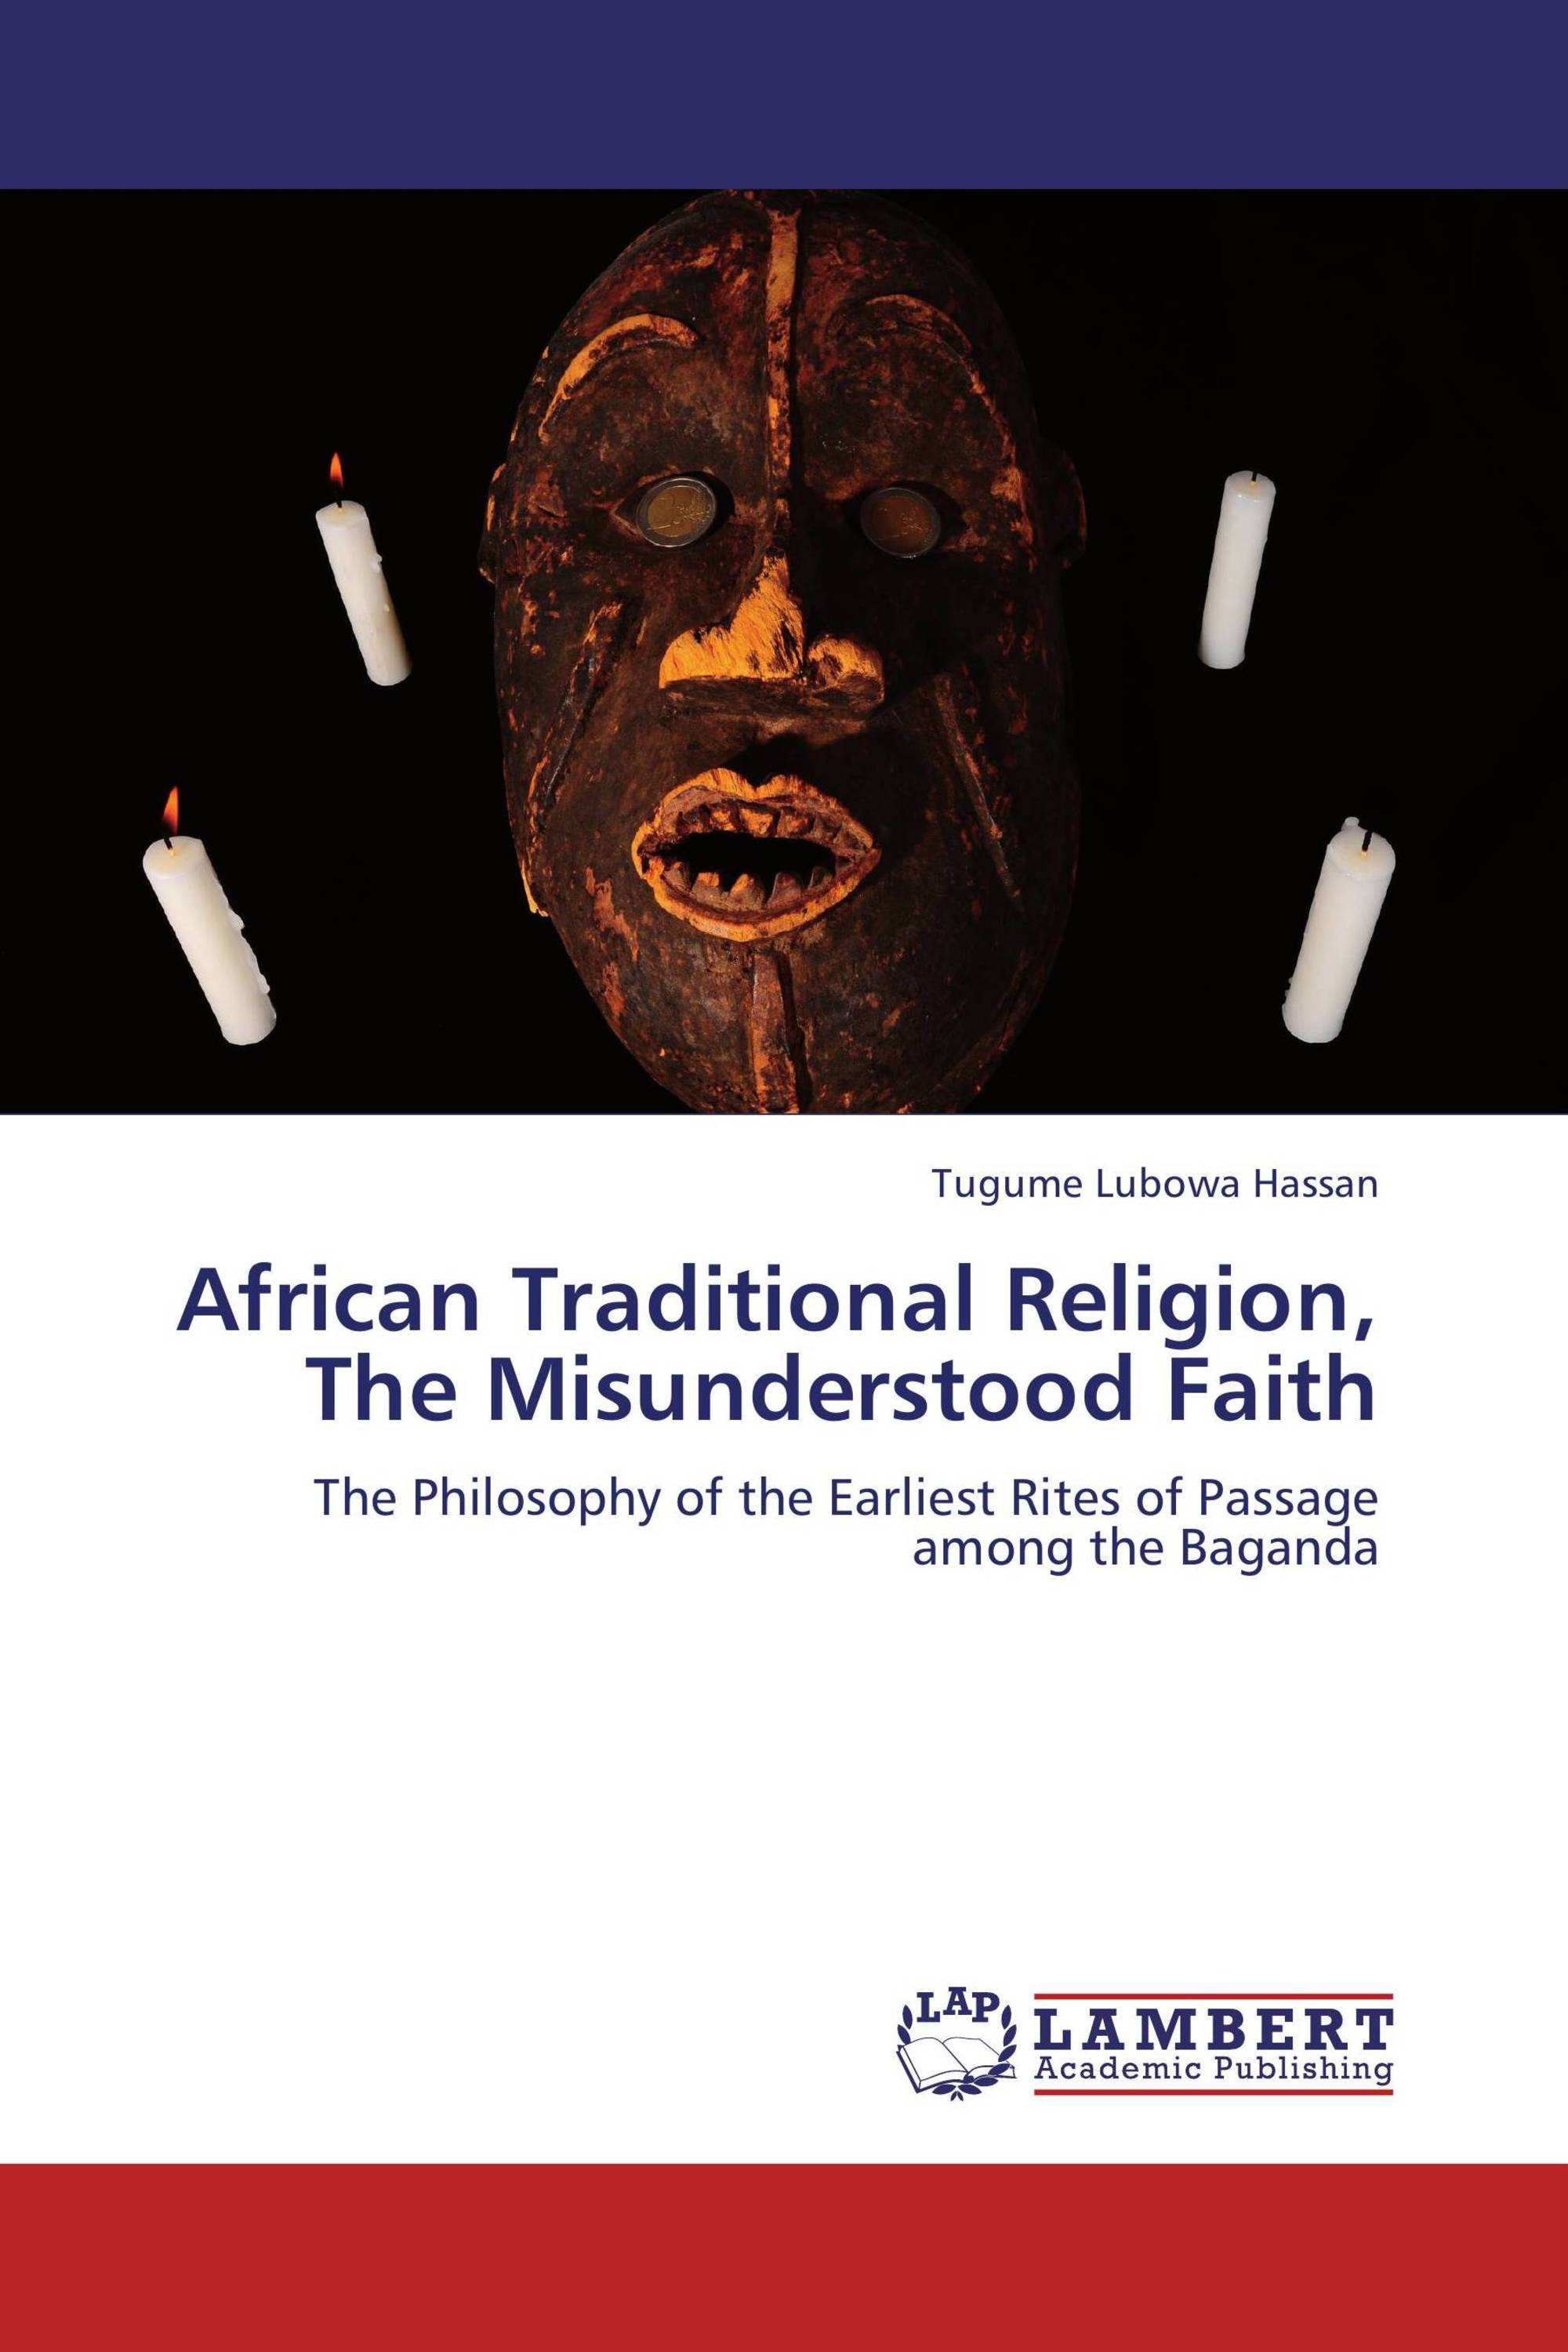 literature review on african traditional religion